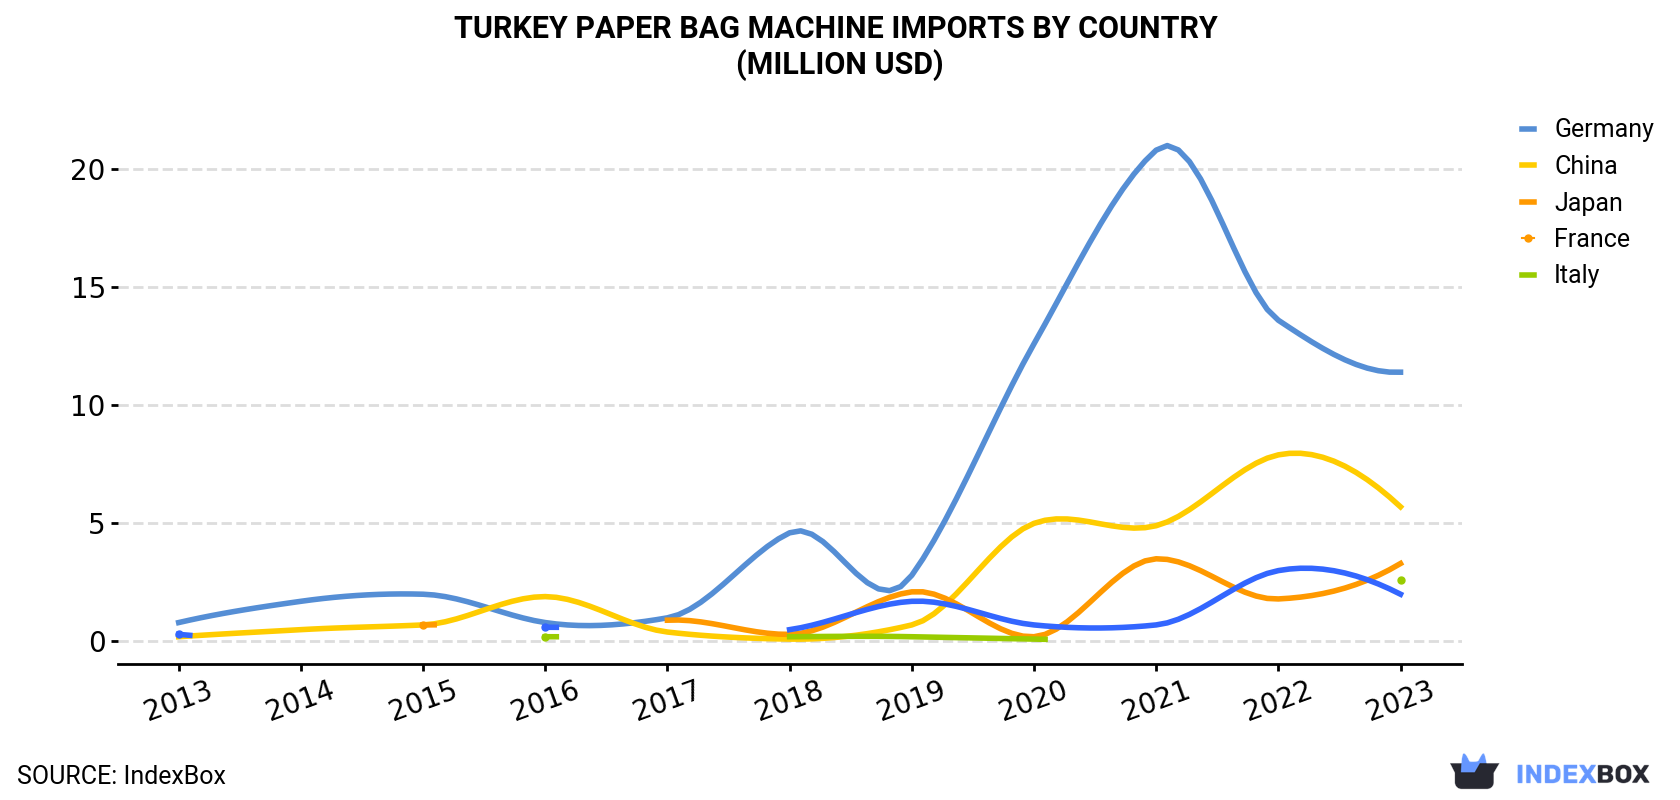 Turkey Paper Bag Machine Imports By Country (Million USD)